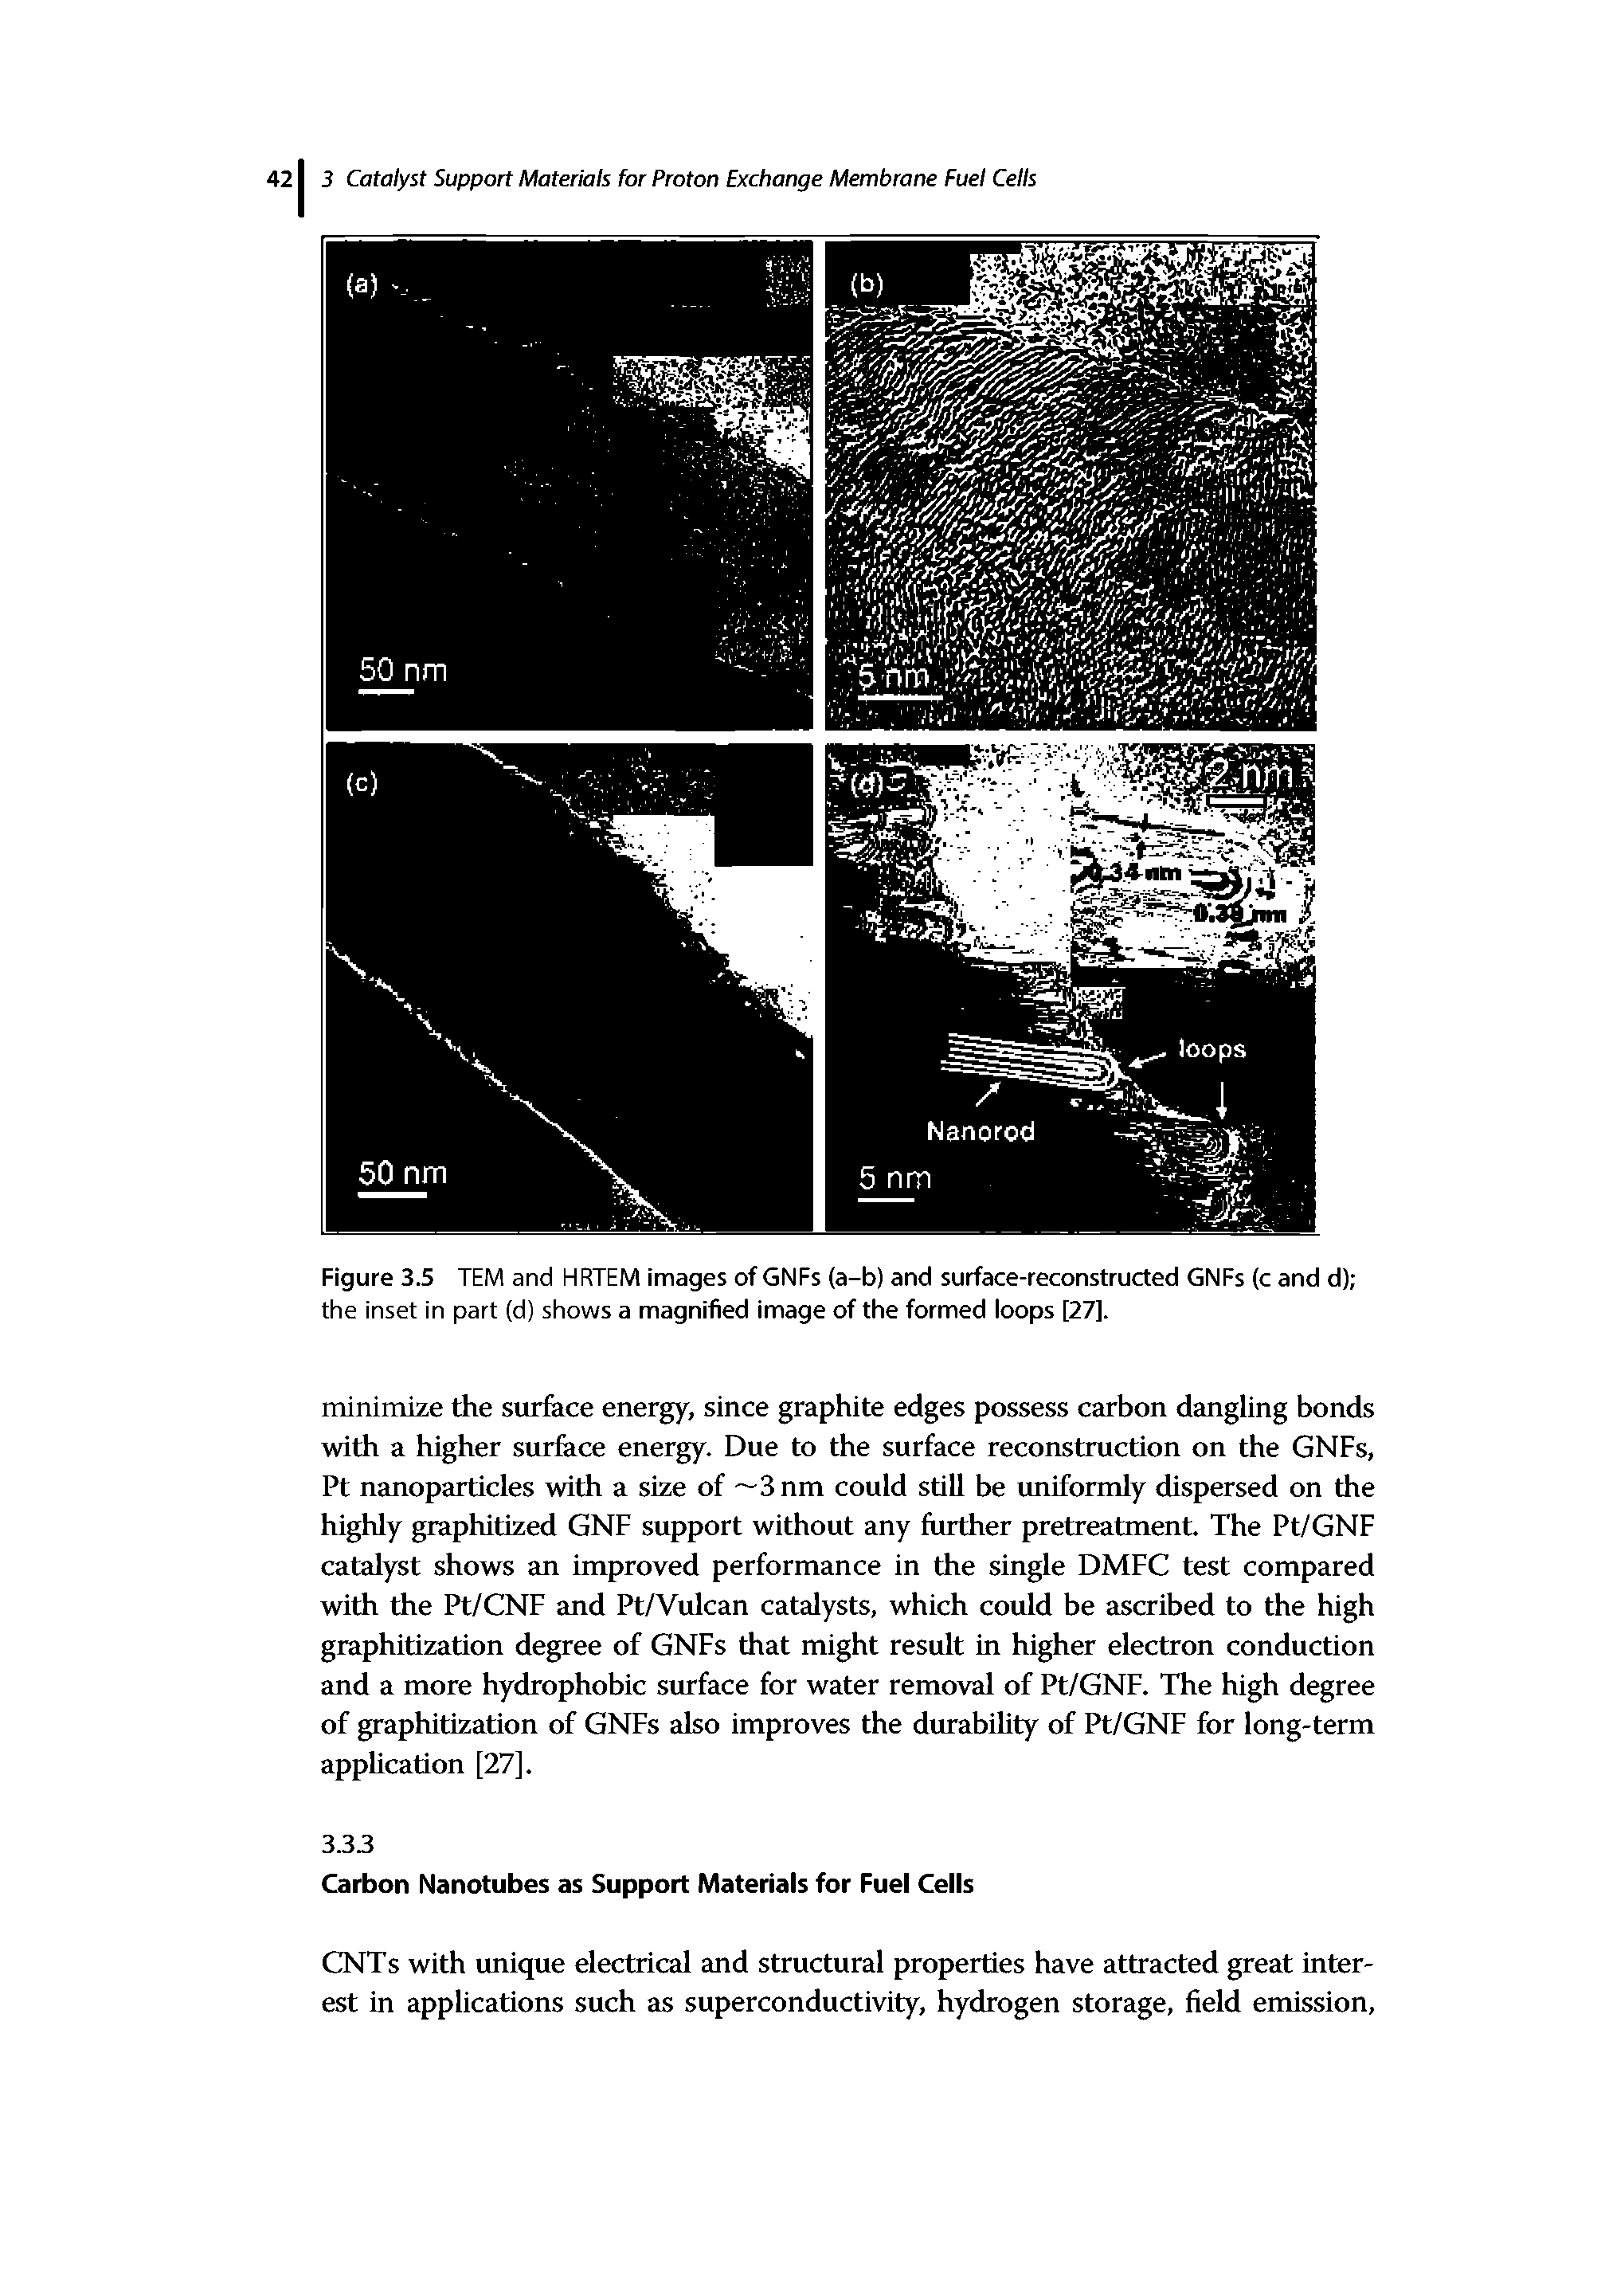 Figure 3.5 TEM and HRTEM images of GNFs (a-b) and surface-reconstructed GNFs (c and d) the inset in part (d) shows a magnified image of the formed loops [27].